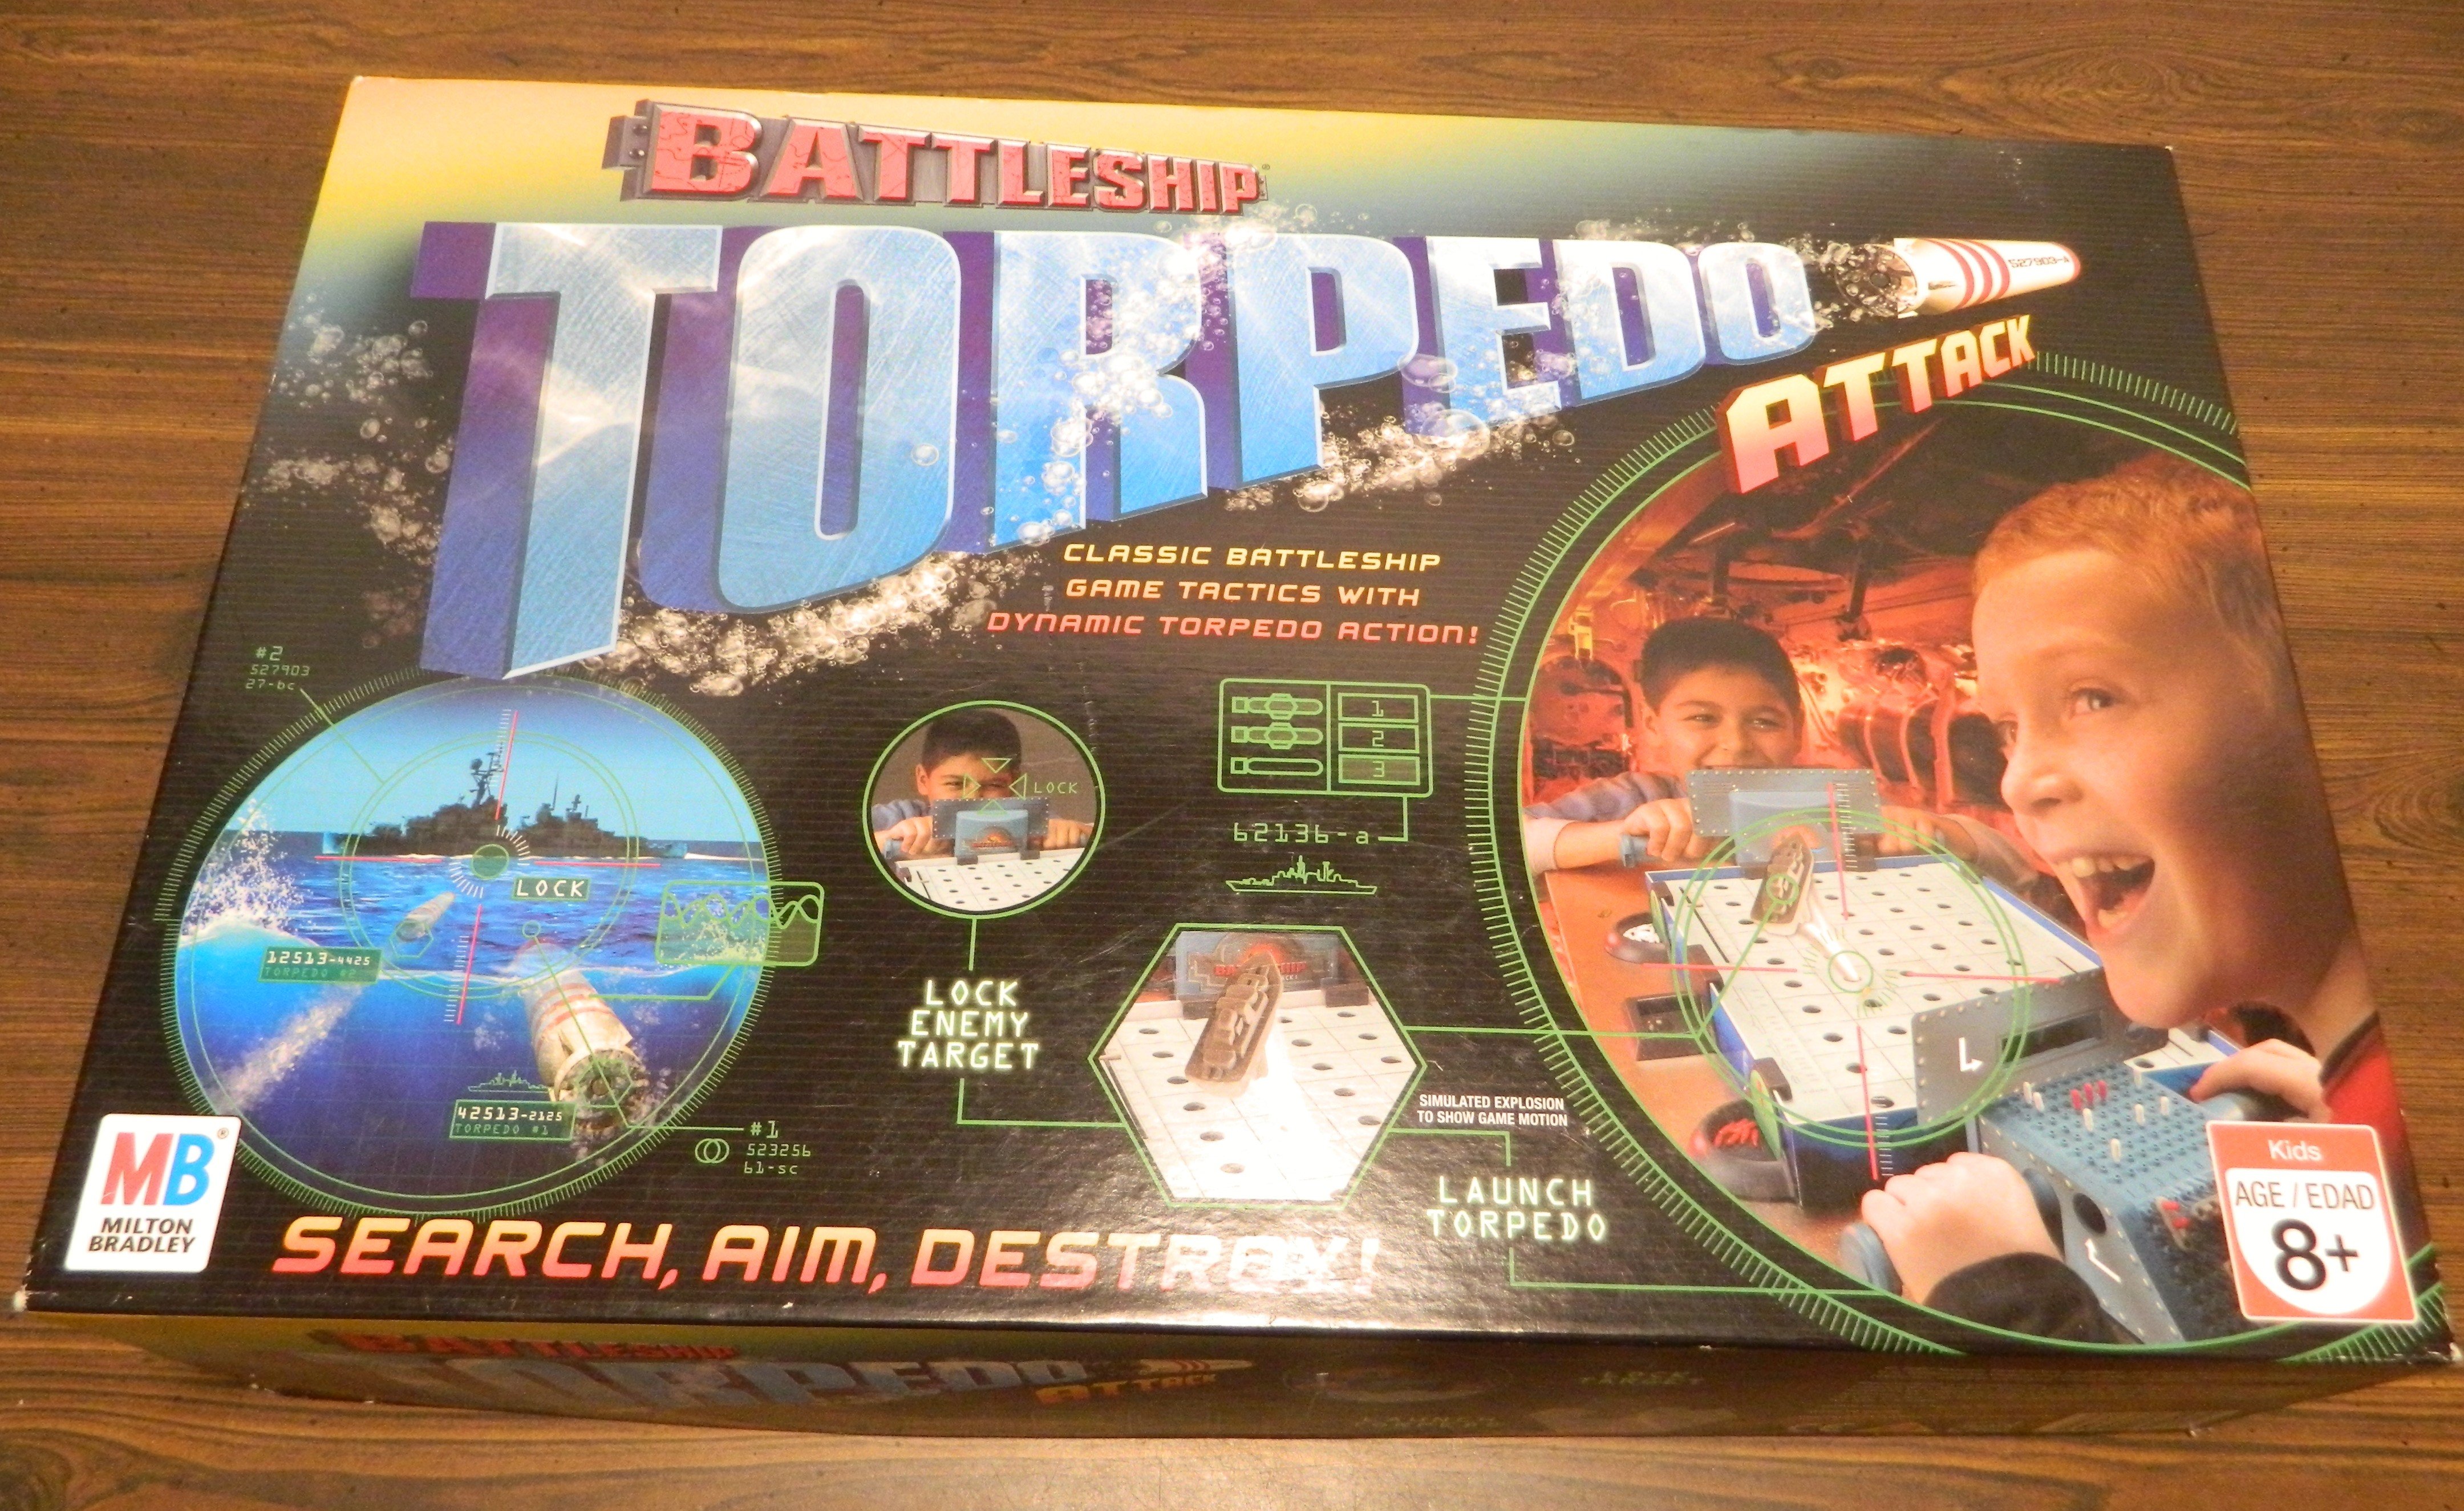 Battleship Torpedo Attack Board Game Review and Rules